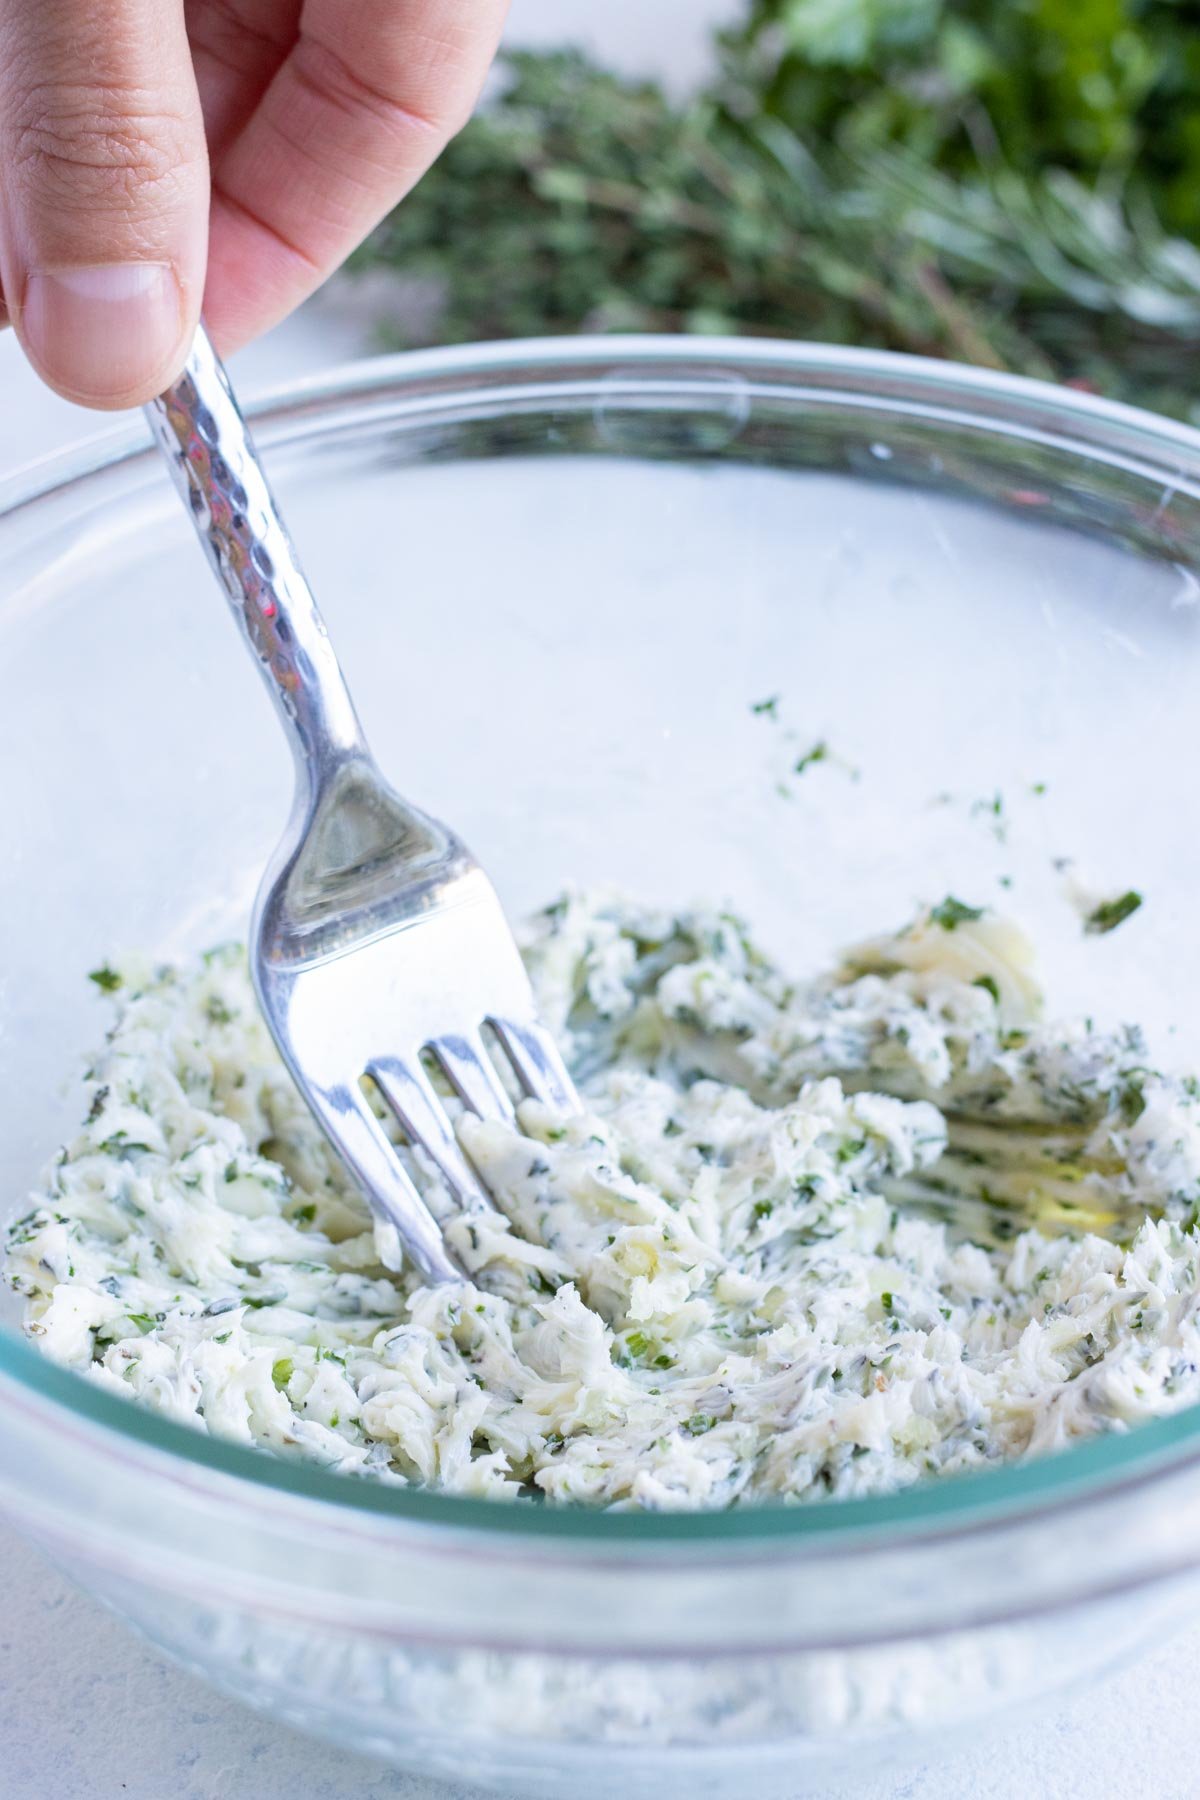 Butter and herbs are mixed together in a bowl until smooth.